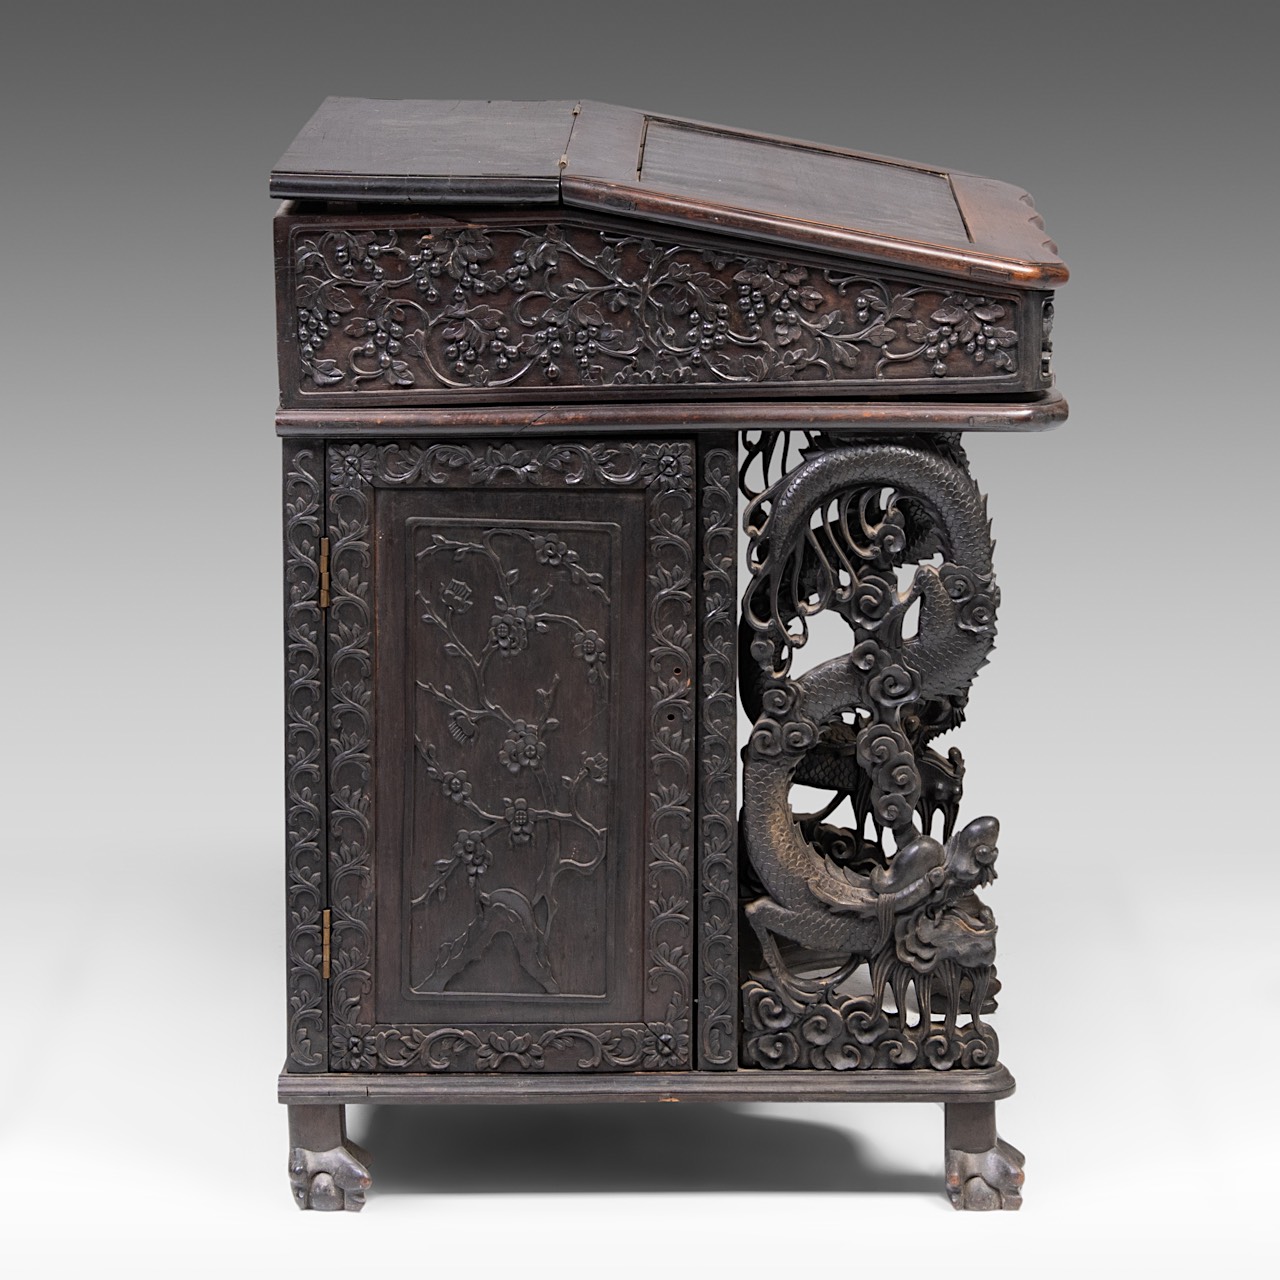 A compact South Chinese carved hardwood writing desk, 19thC, H 83 - W 66 - D 62 cm - Image 6 of 10